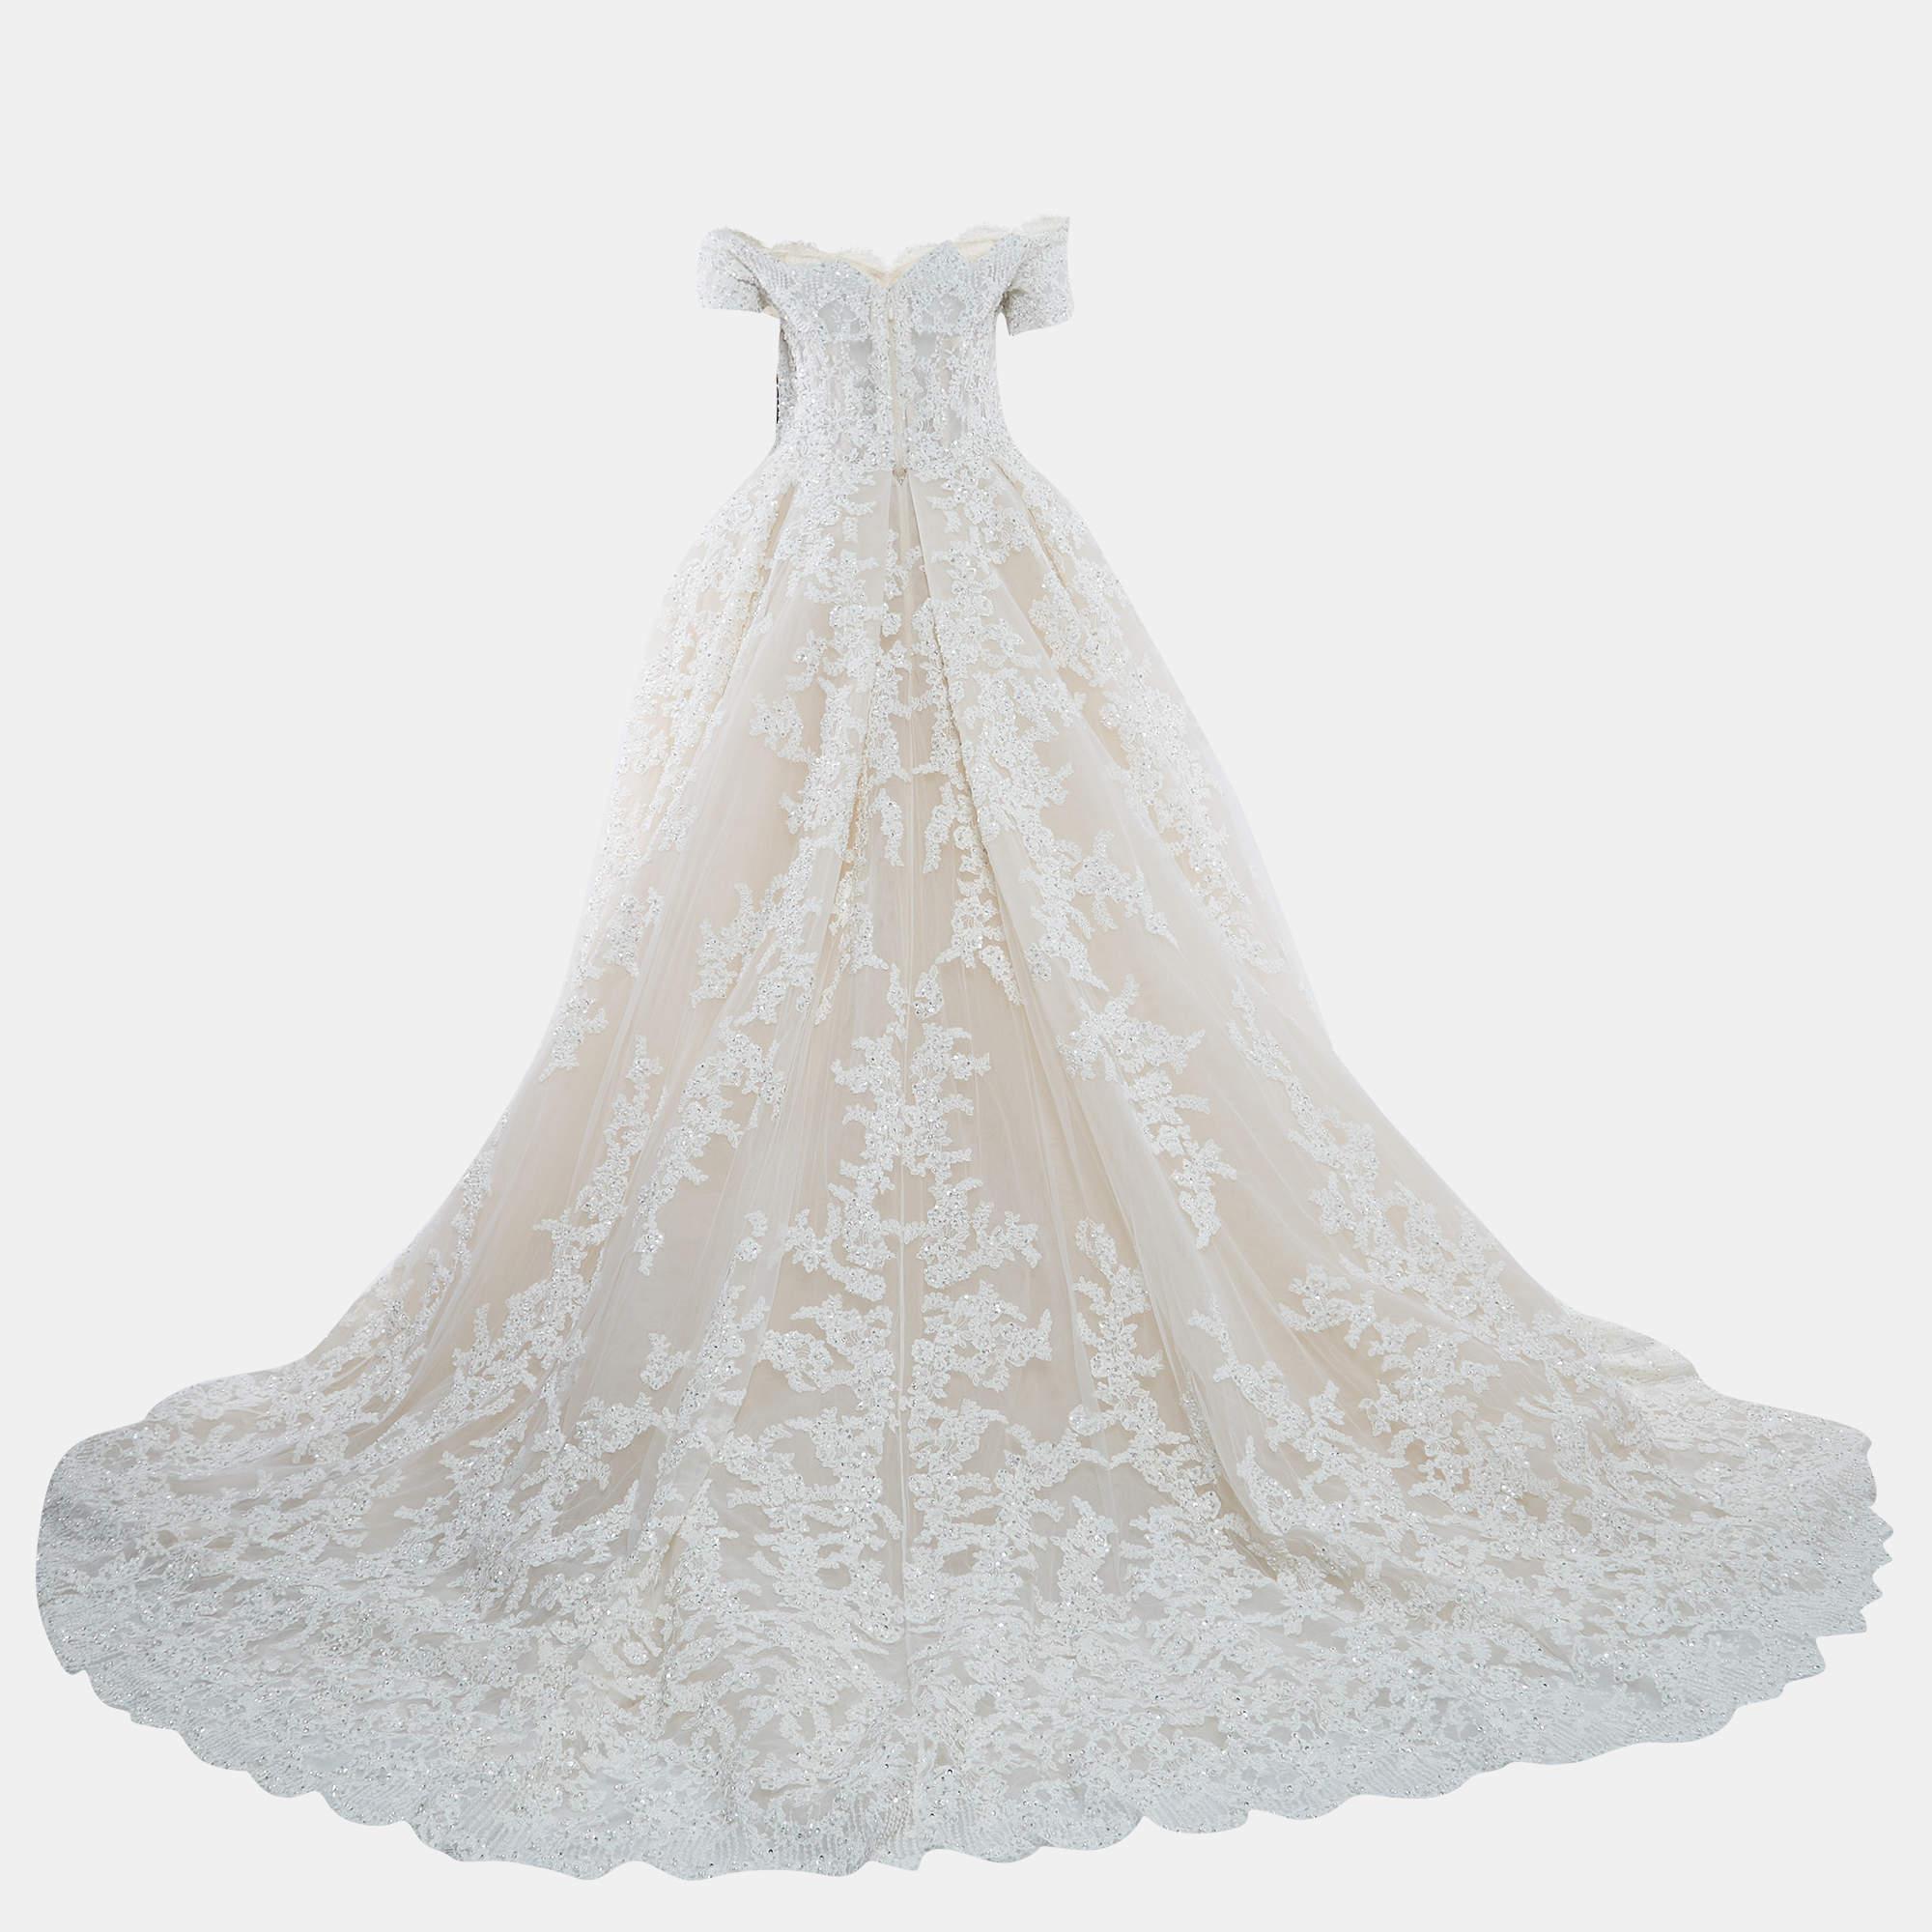 The Zuhair Murad wedding gown is a stunning and ethereal choice for brides. The gown features intricate embroidery on delicate ivory mesh, creating a romantic and timeless look. The design showcases Murad's signature craftsmanship, with a fitted